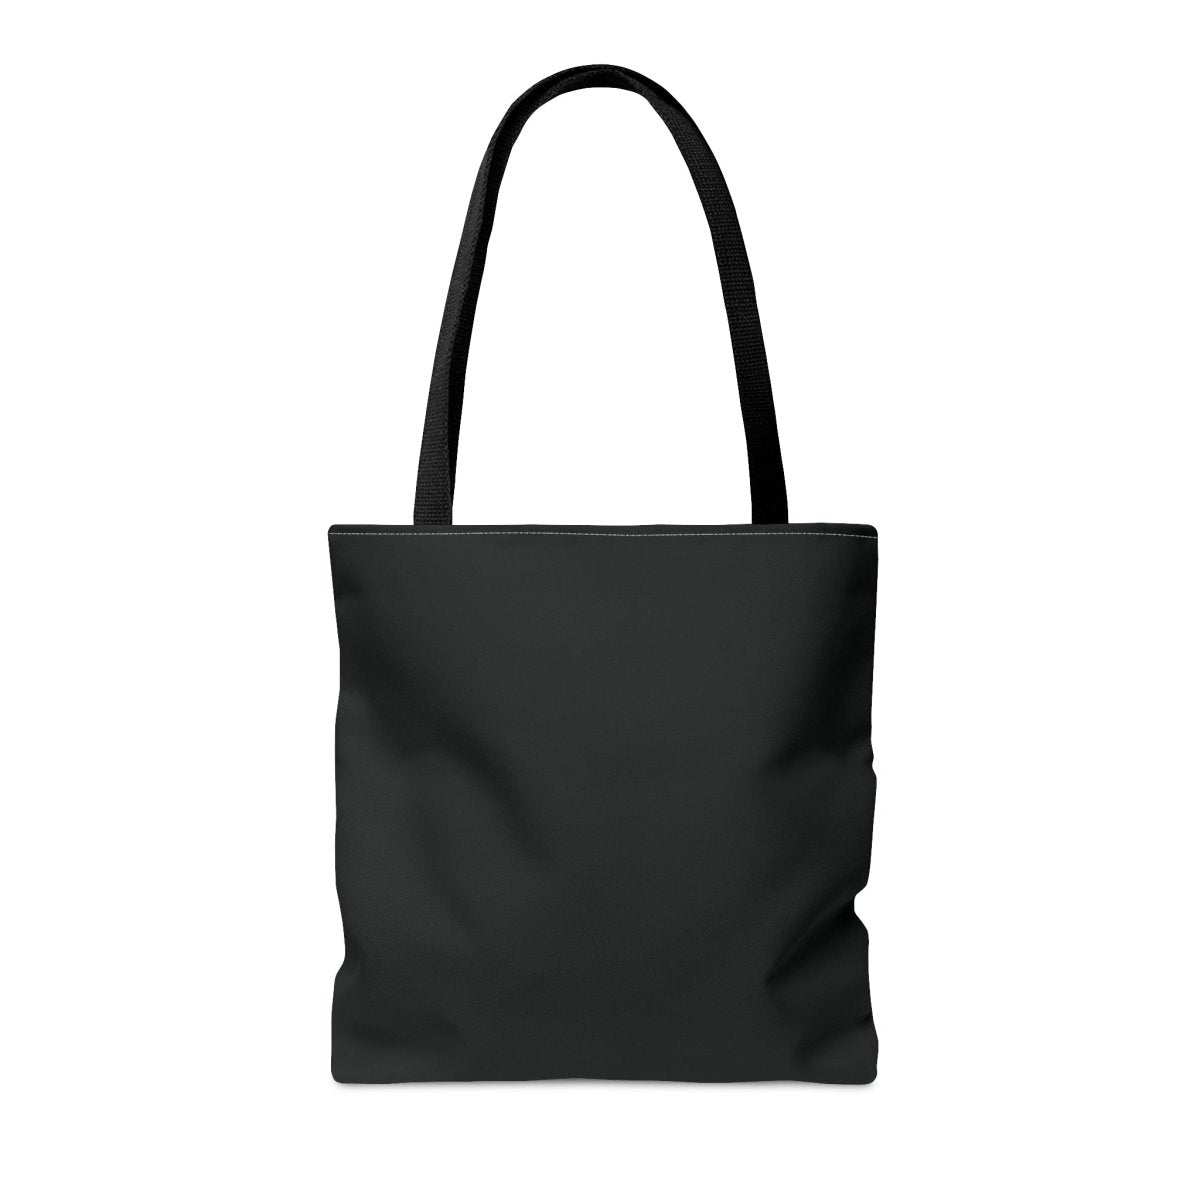 Royal Dog Tote Bag - Style C - DarzyStore